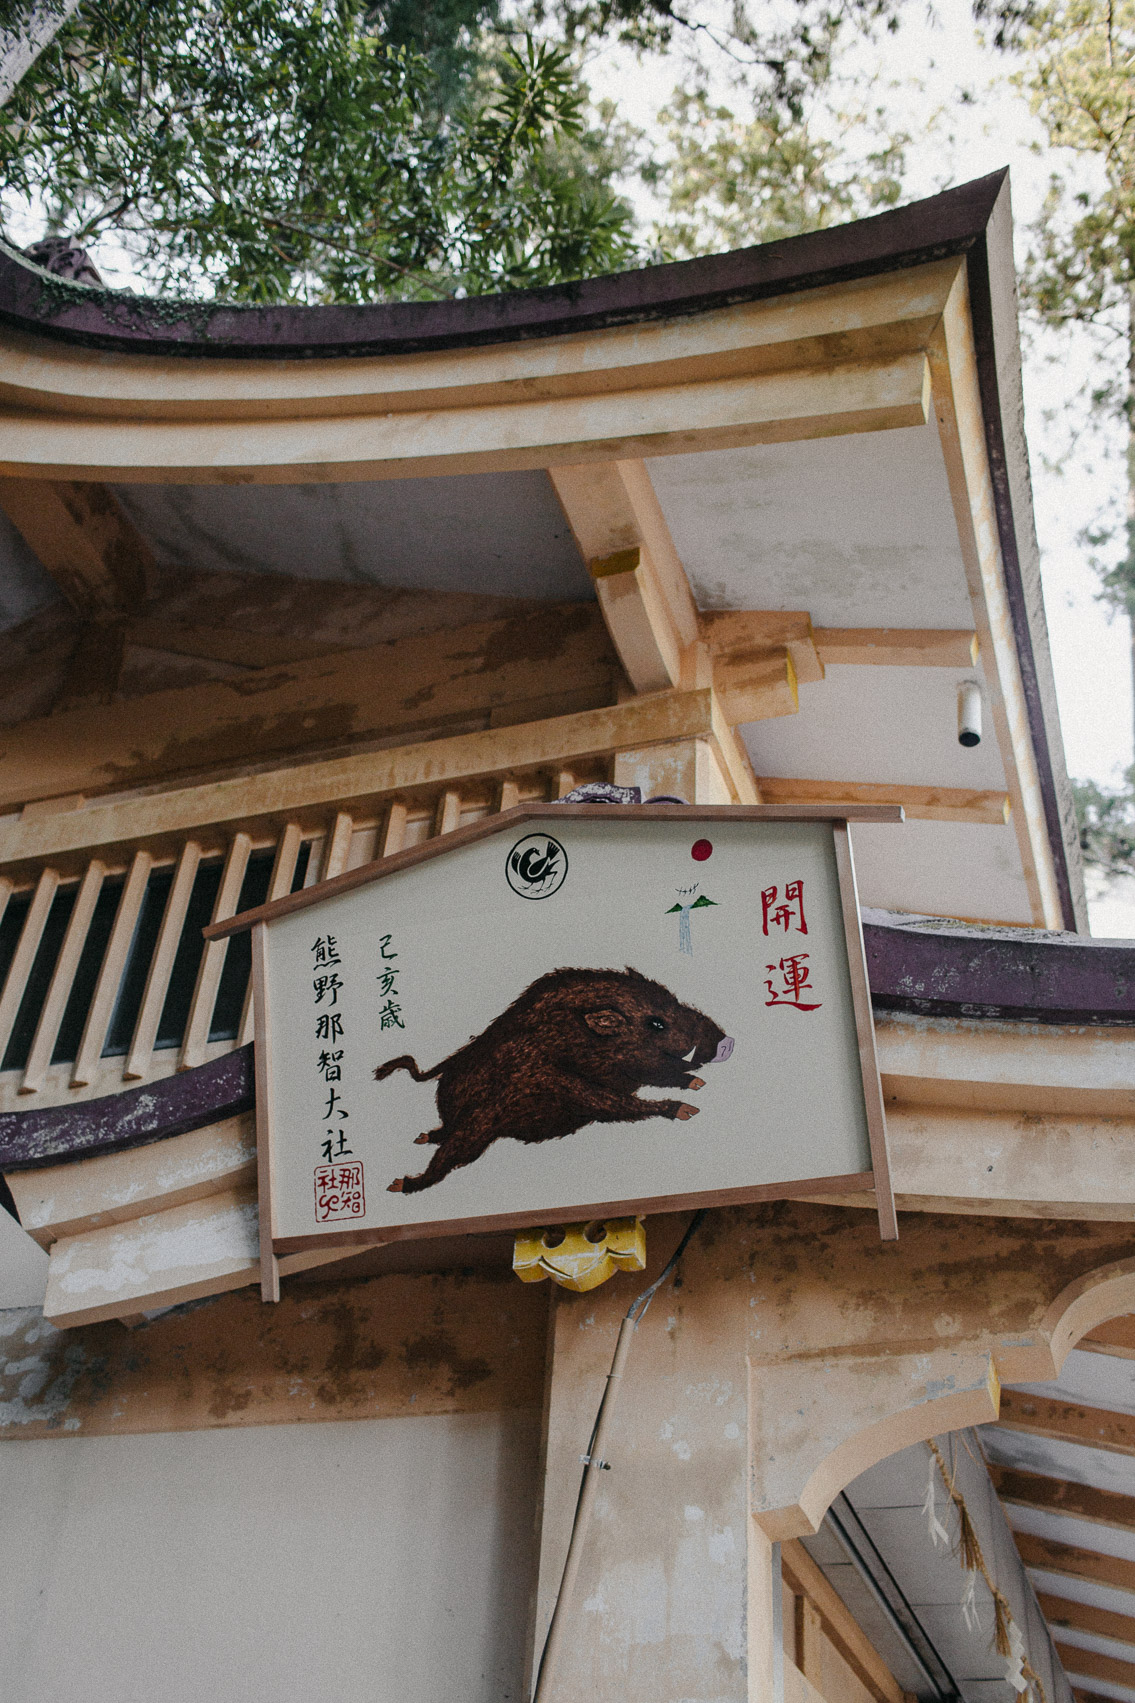 Nachi falls - The cat, you and us